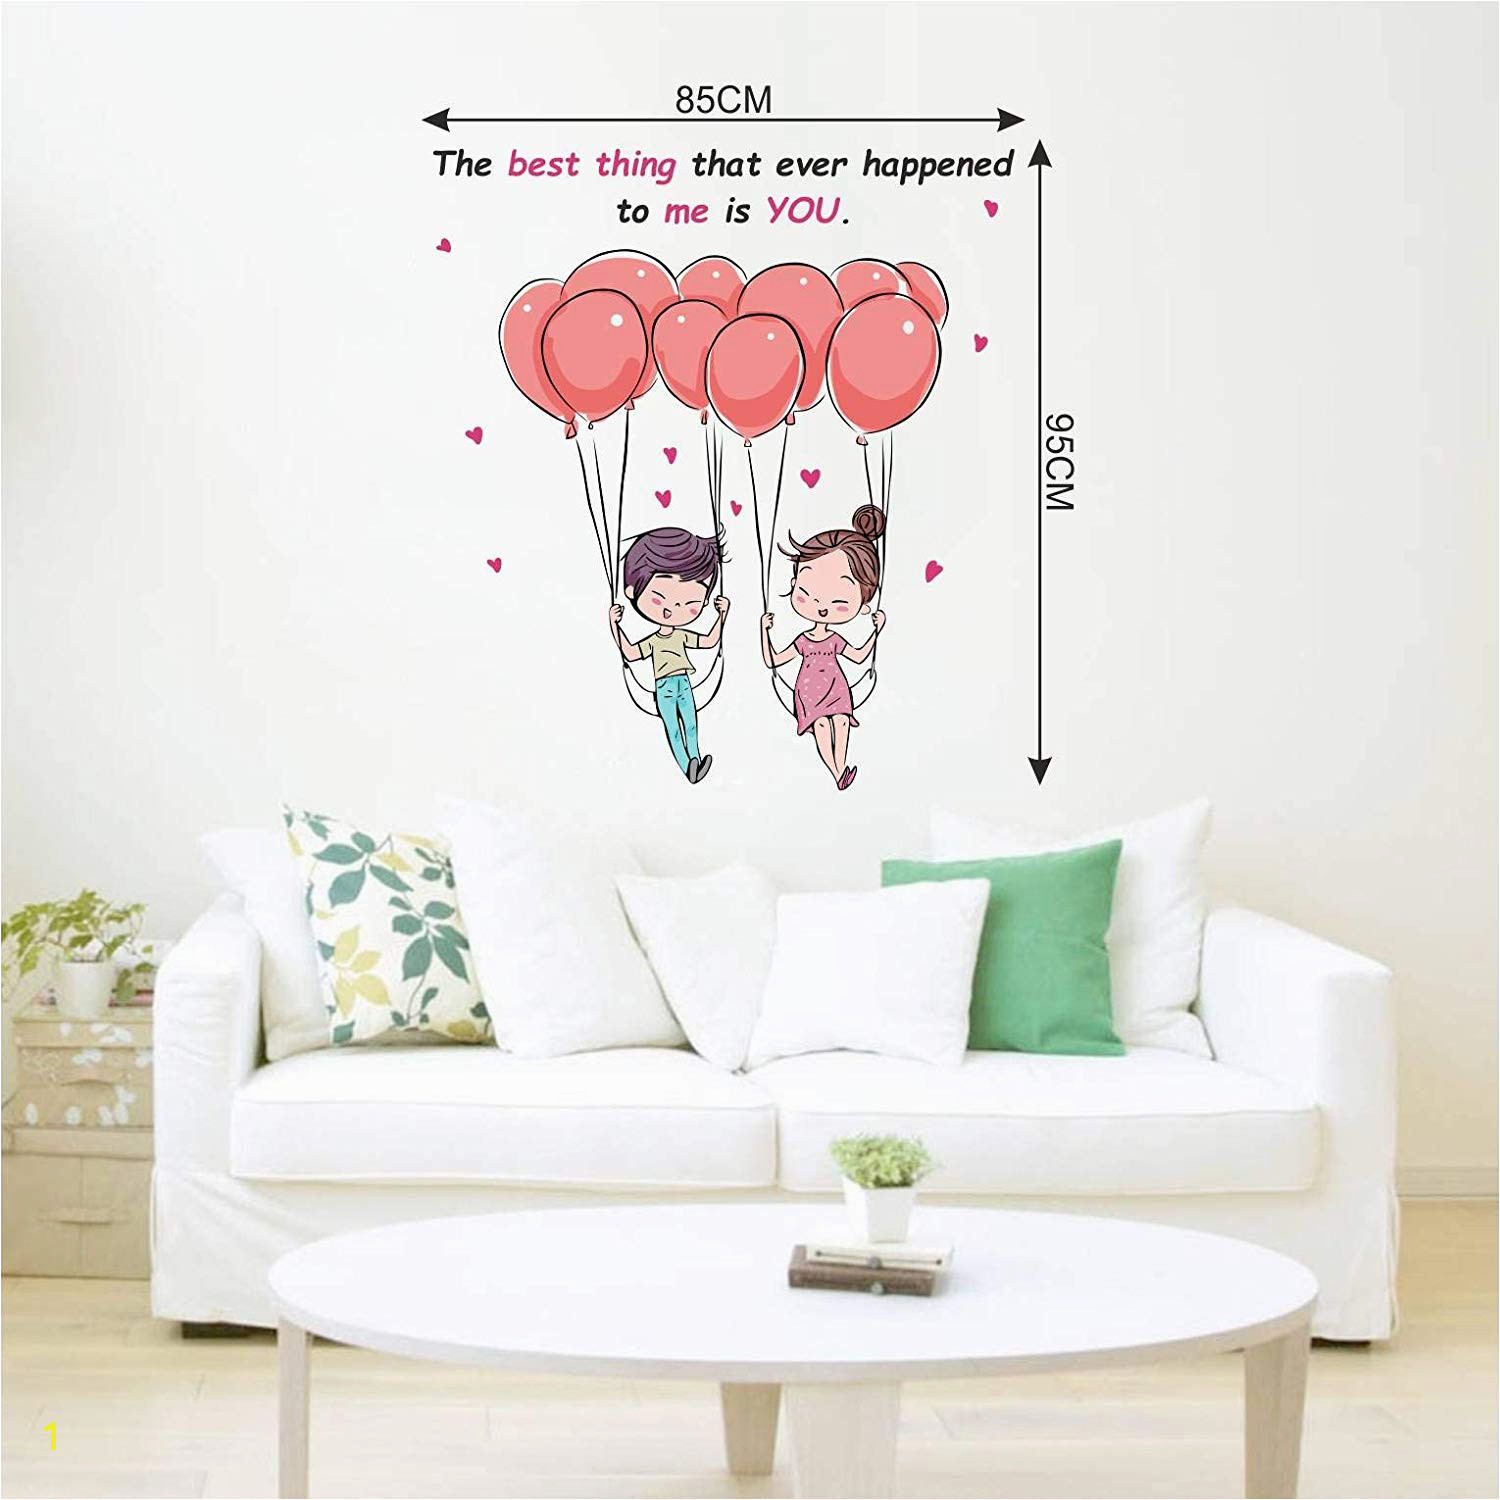 French Door Wall Murals Buy Decal O Decal Wall Decals Couple Flying with Balloons